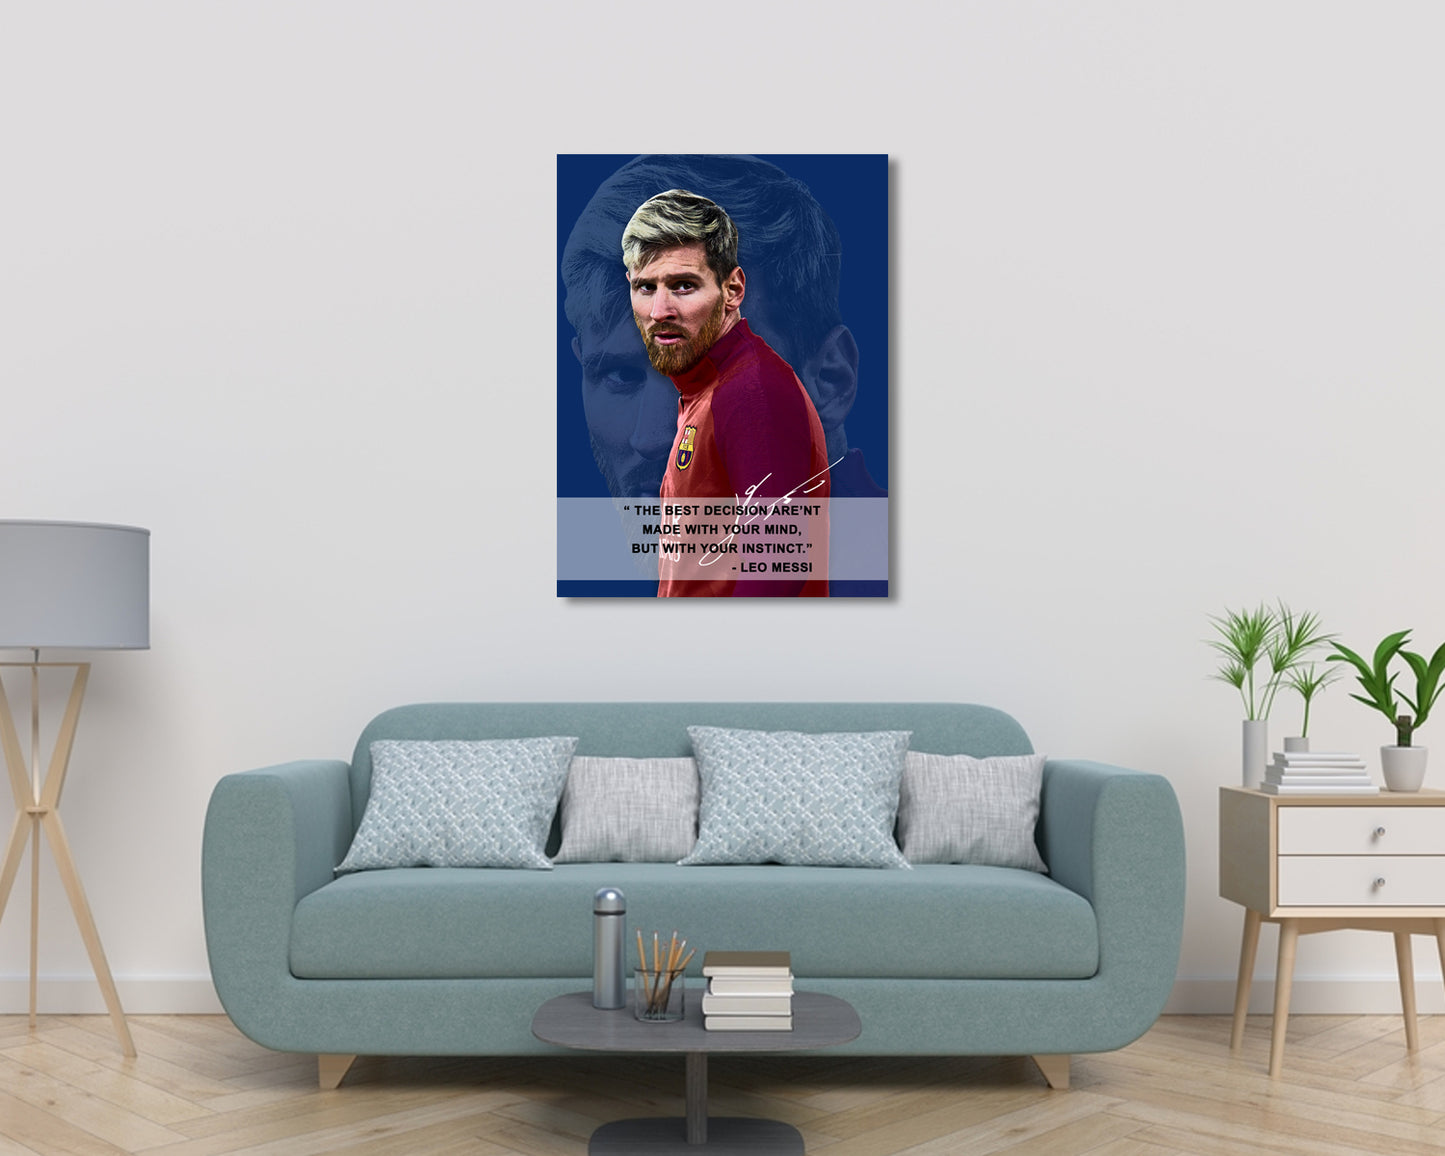 Lionel Messi The best decision arent made with your mind Canvas Wall Art 